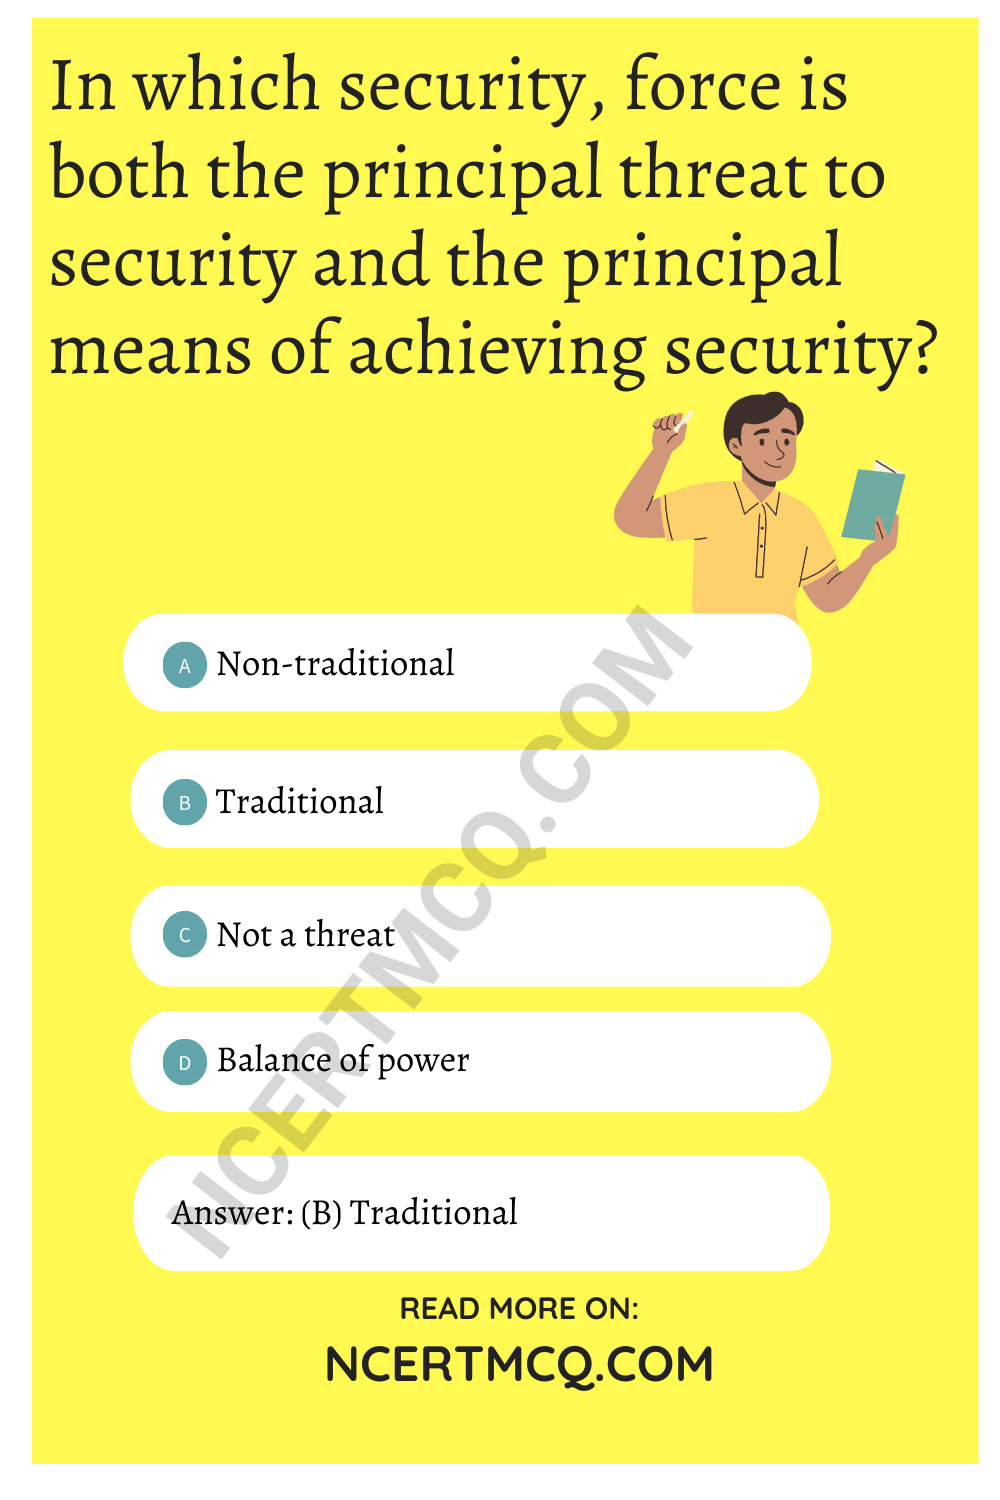 In which security, force is both the principal threat to security and the principal means of achieving security?